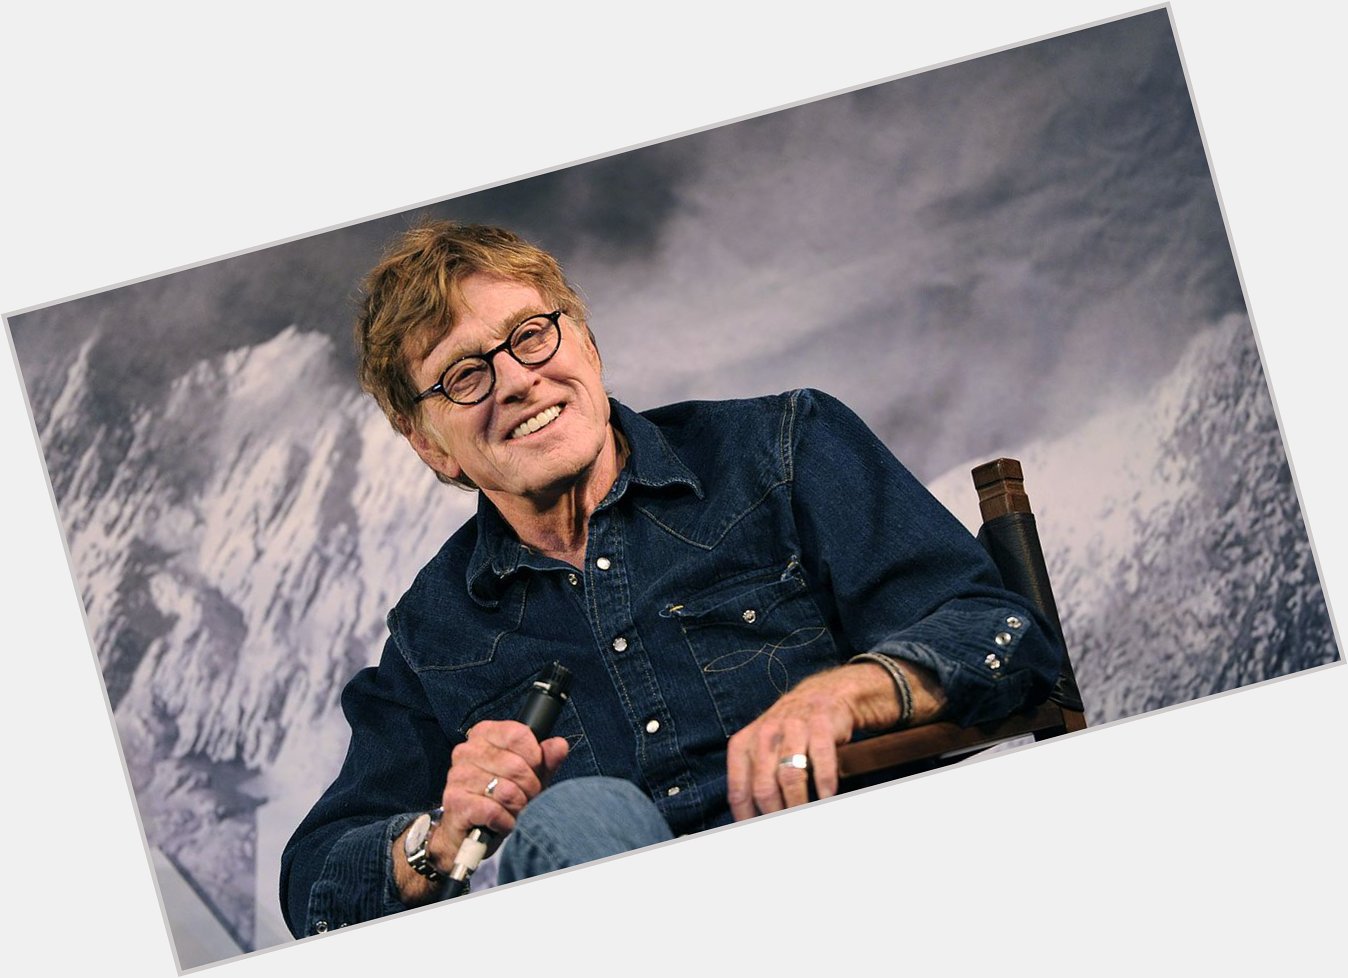 Happy Birthday Robert Redford! Think ya used enough dynamite there, Butch? -as The Sundance Kid :) 